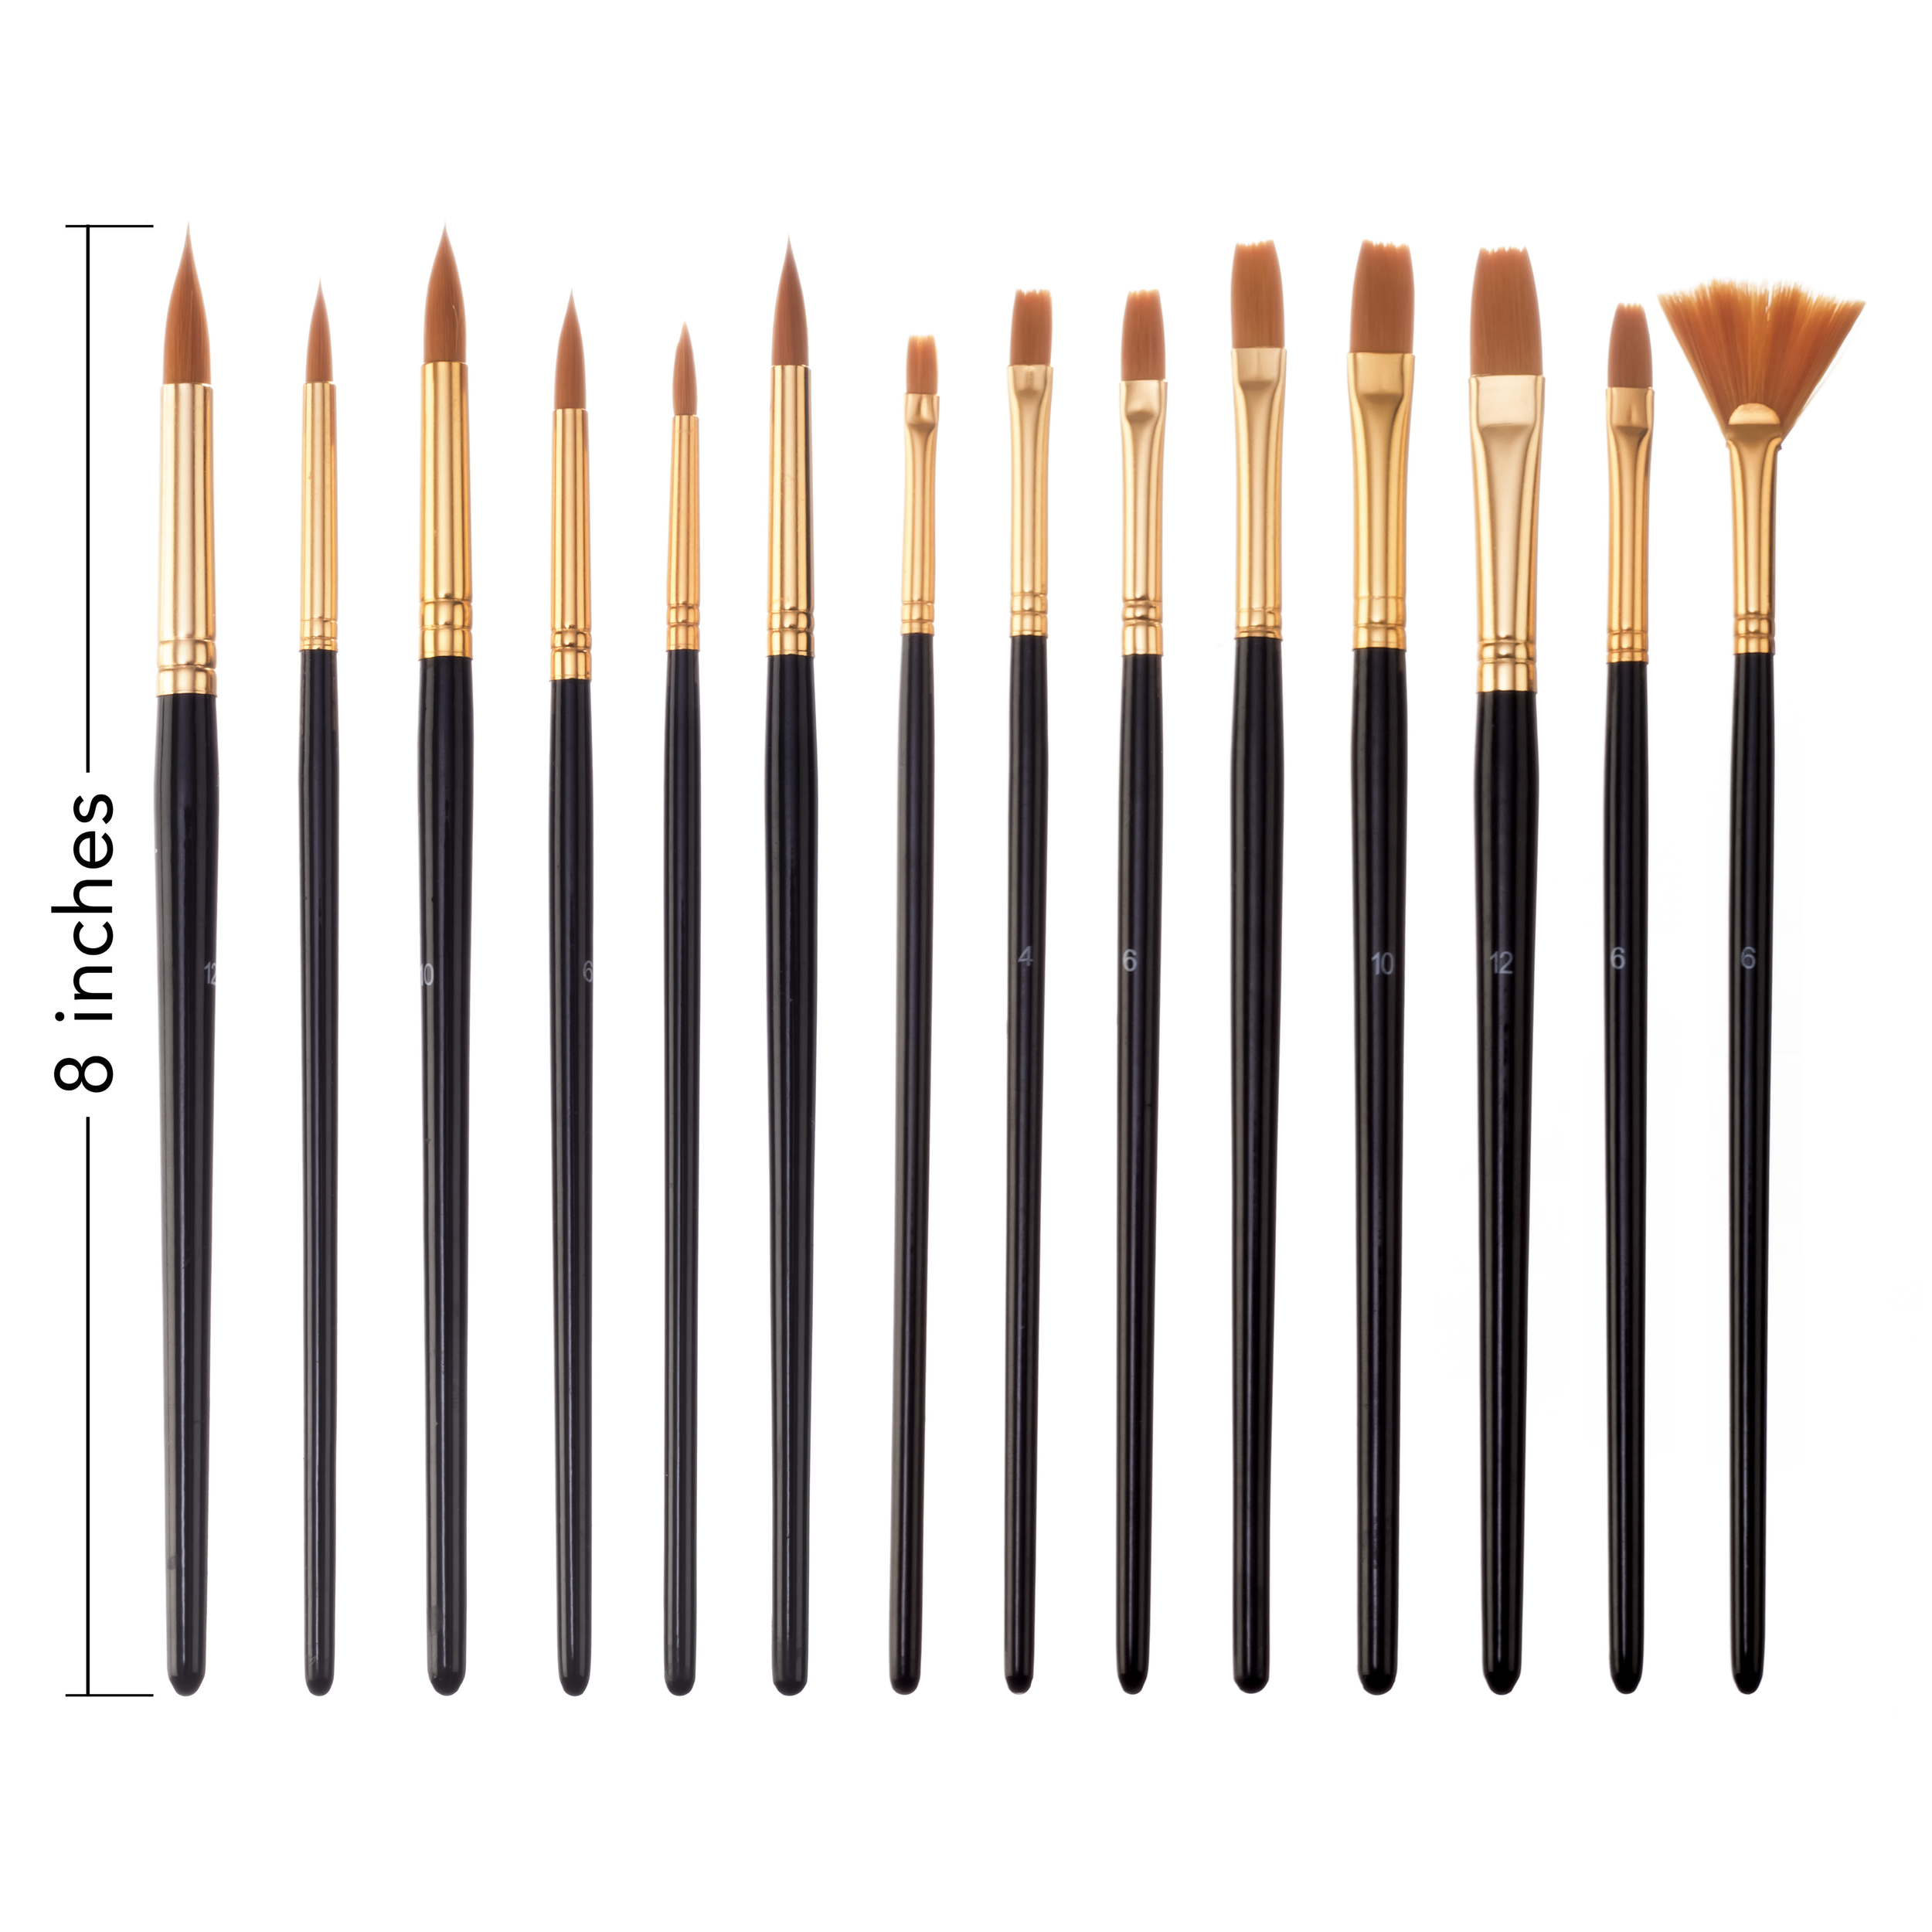 Jerry Q Art 12 PC Brown Synthetic Hair Round and Flat Paint Brush Set with  Short Wood Handles for Acrylic, Watercolor and All Media JQ59831 